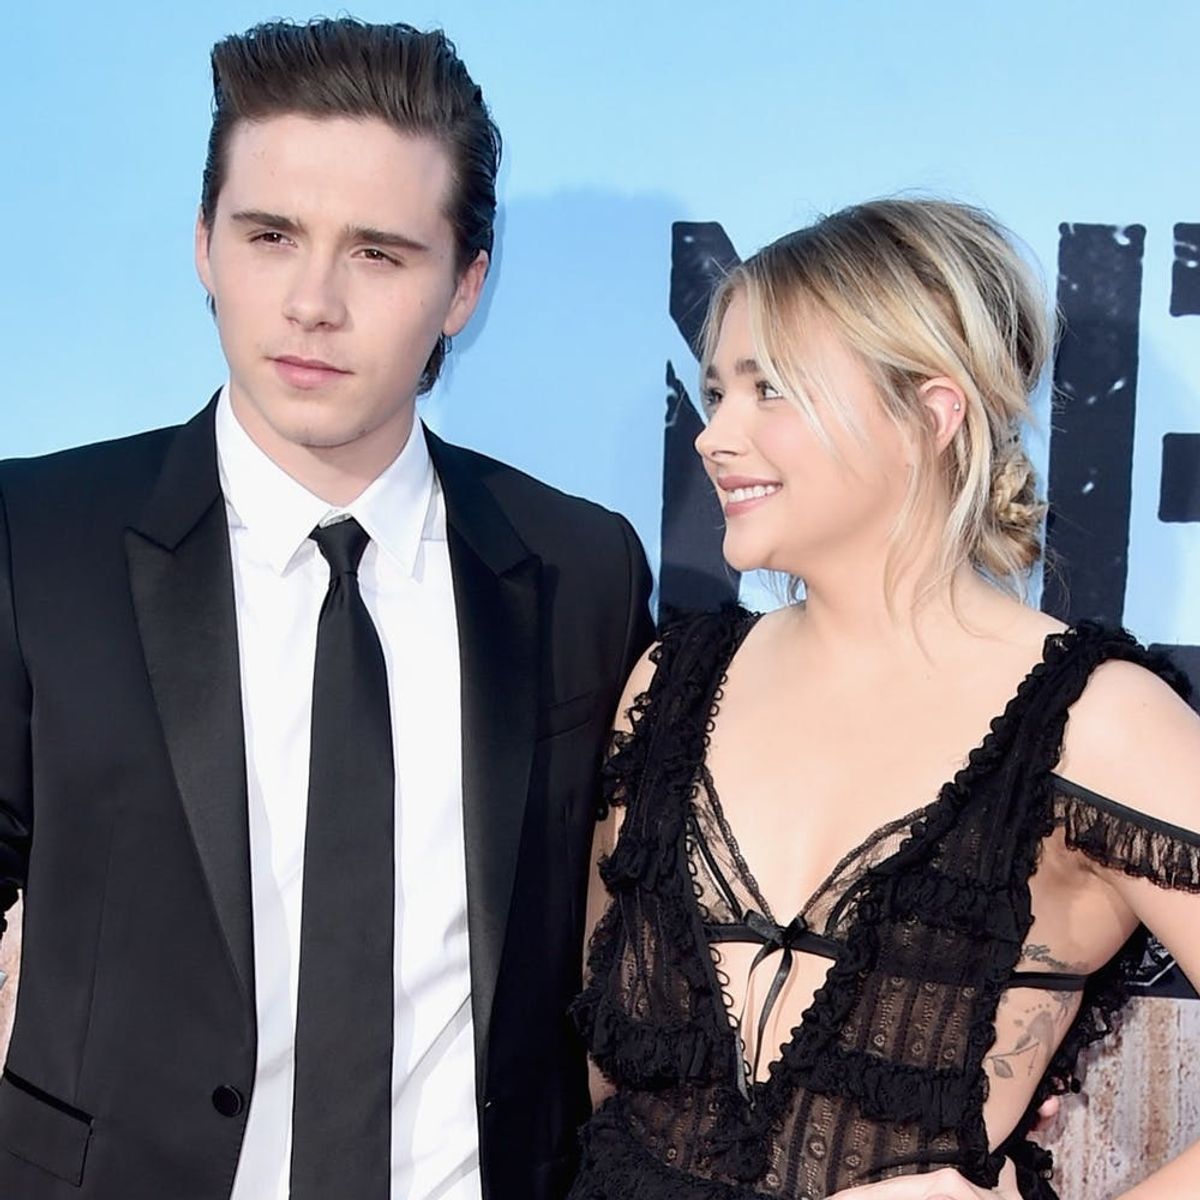 Brooklyn Beckham Appears to Have a New Lady That’s NOT Chloë Grace Moretz